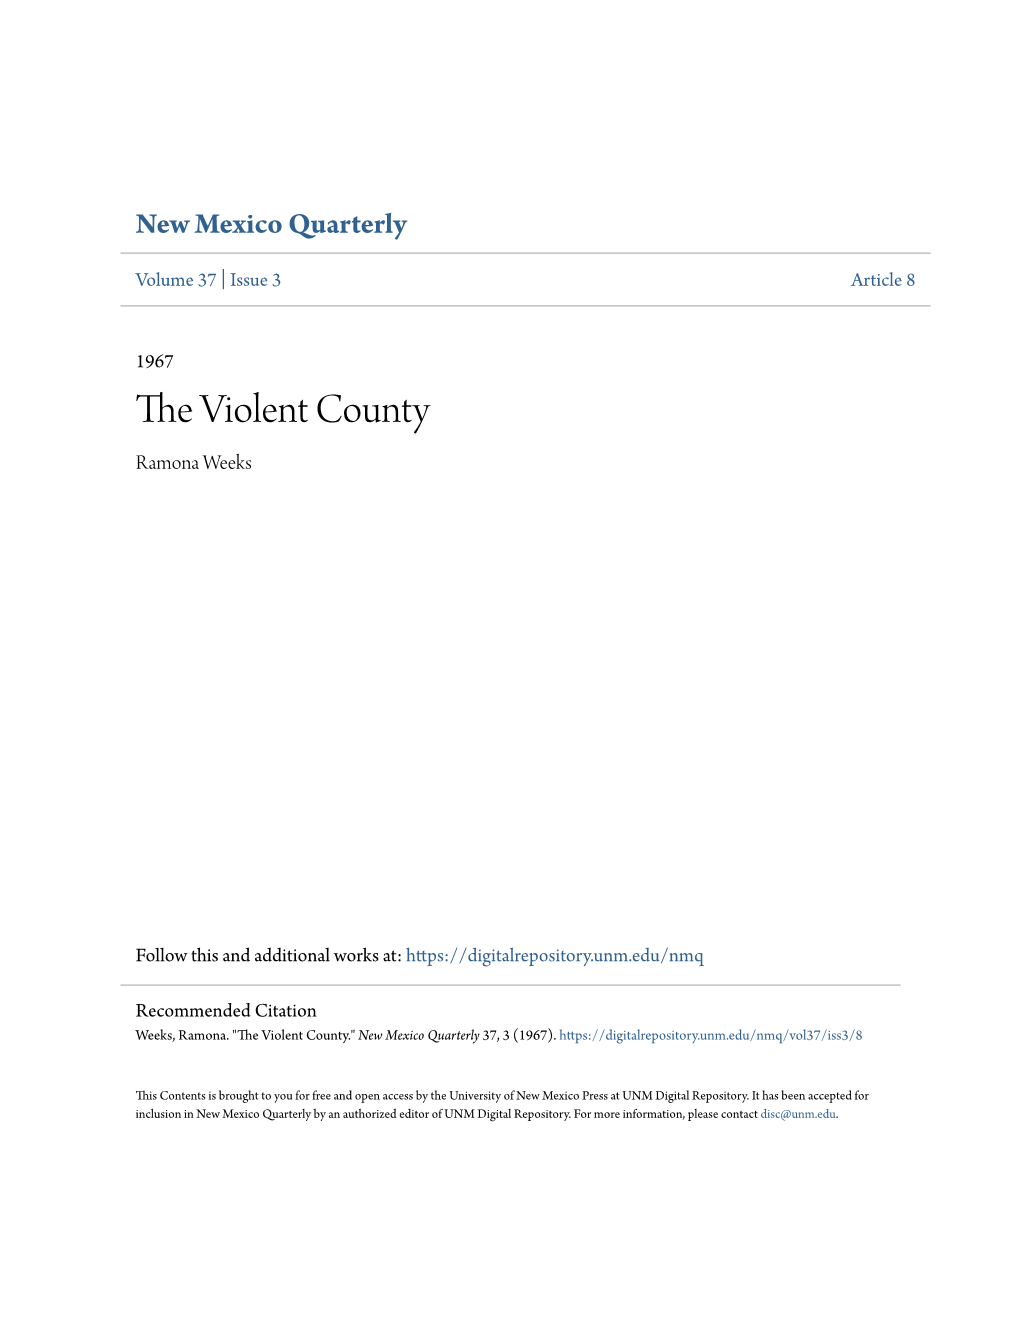 The Violent County